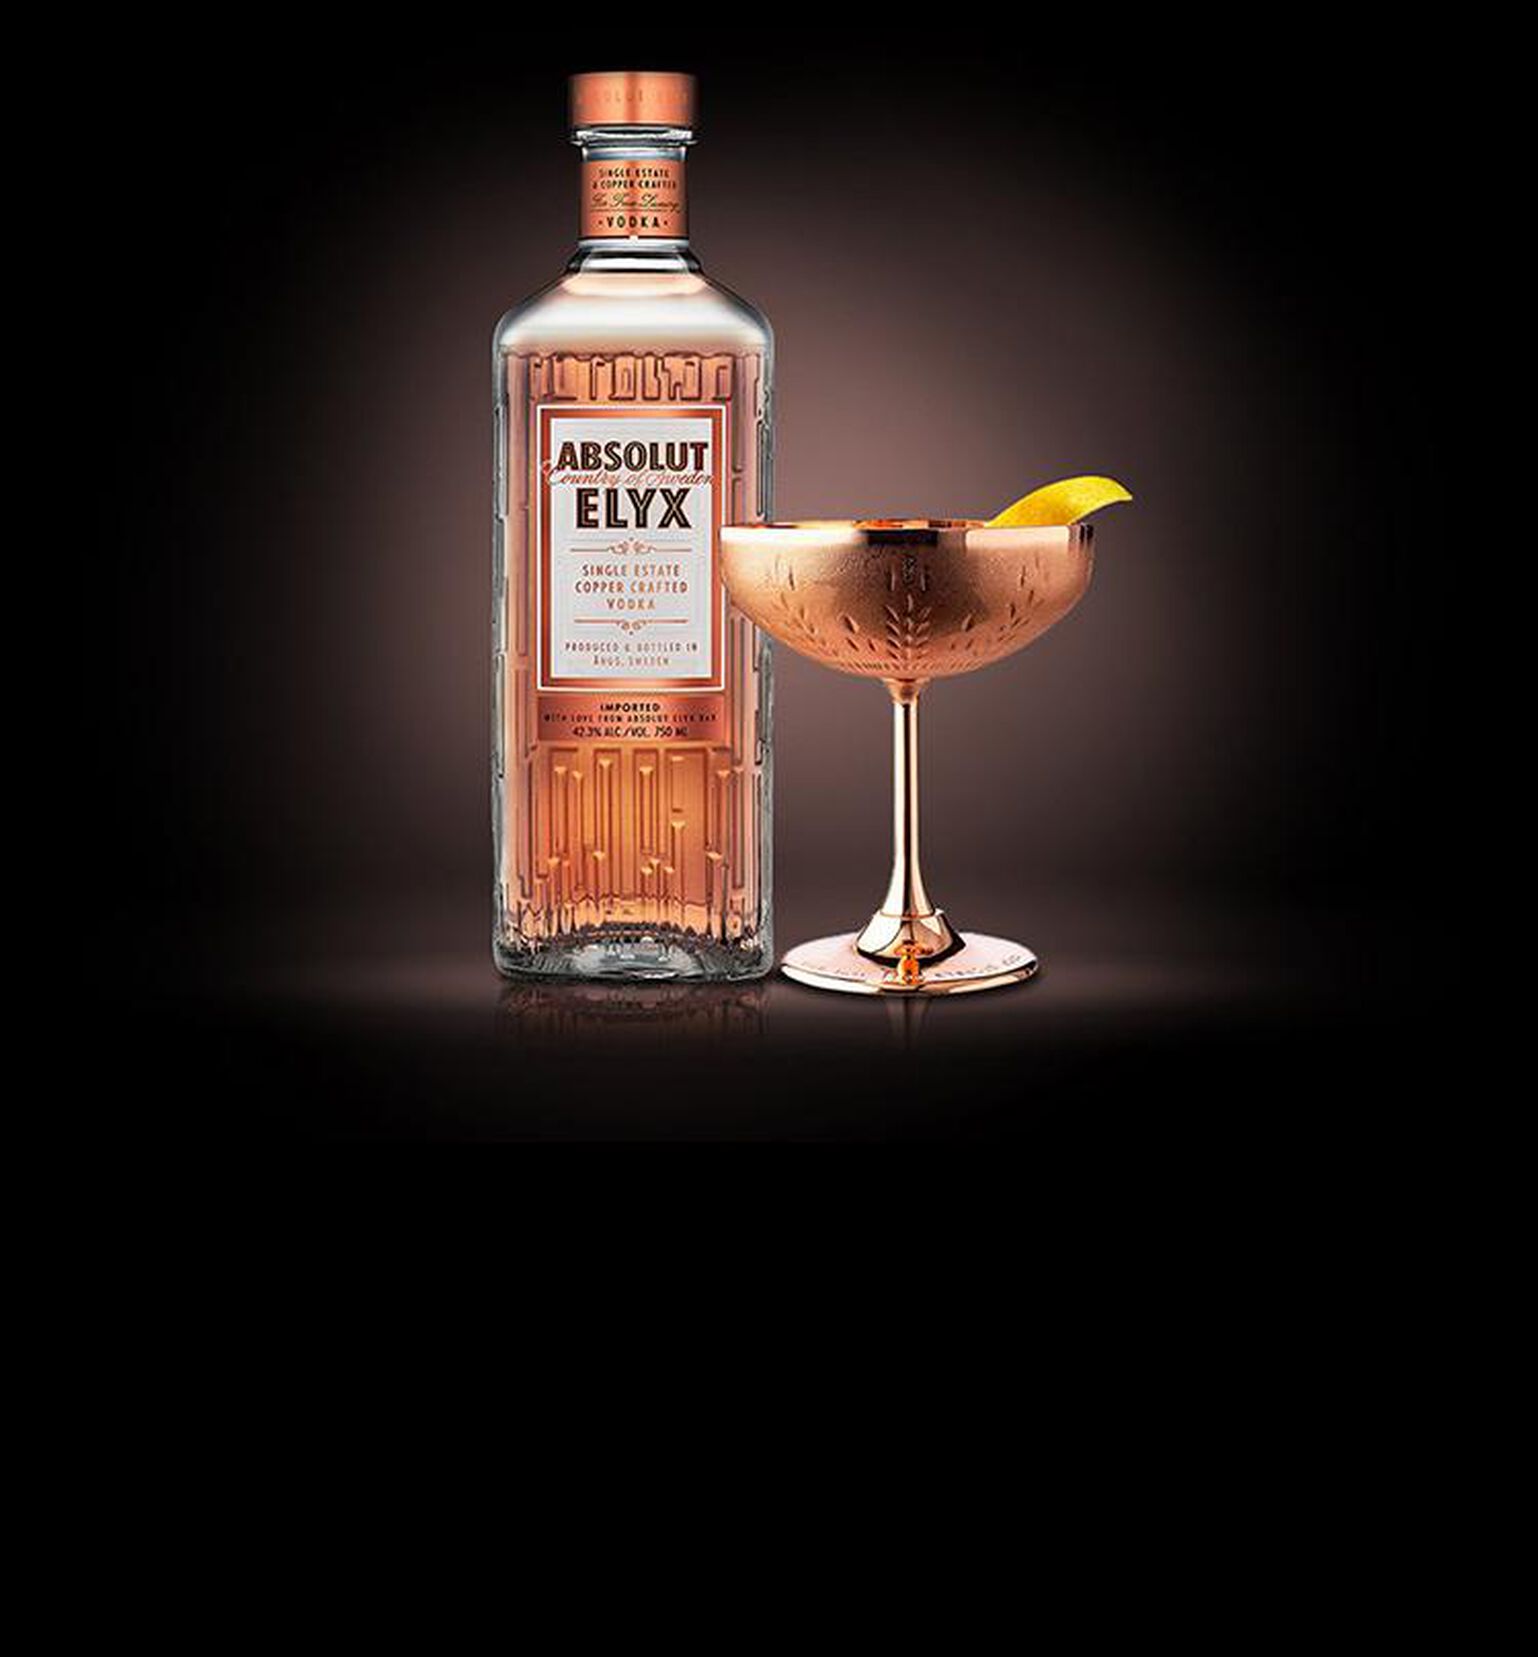 The Absolut Elyx Martini Cocktail